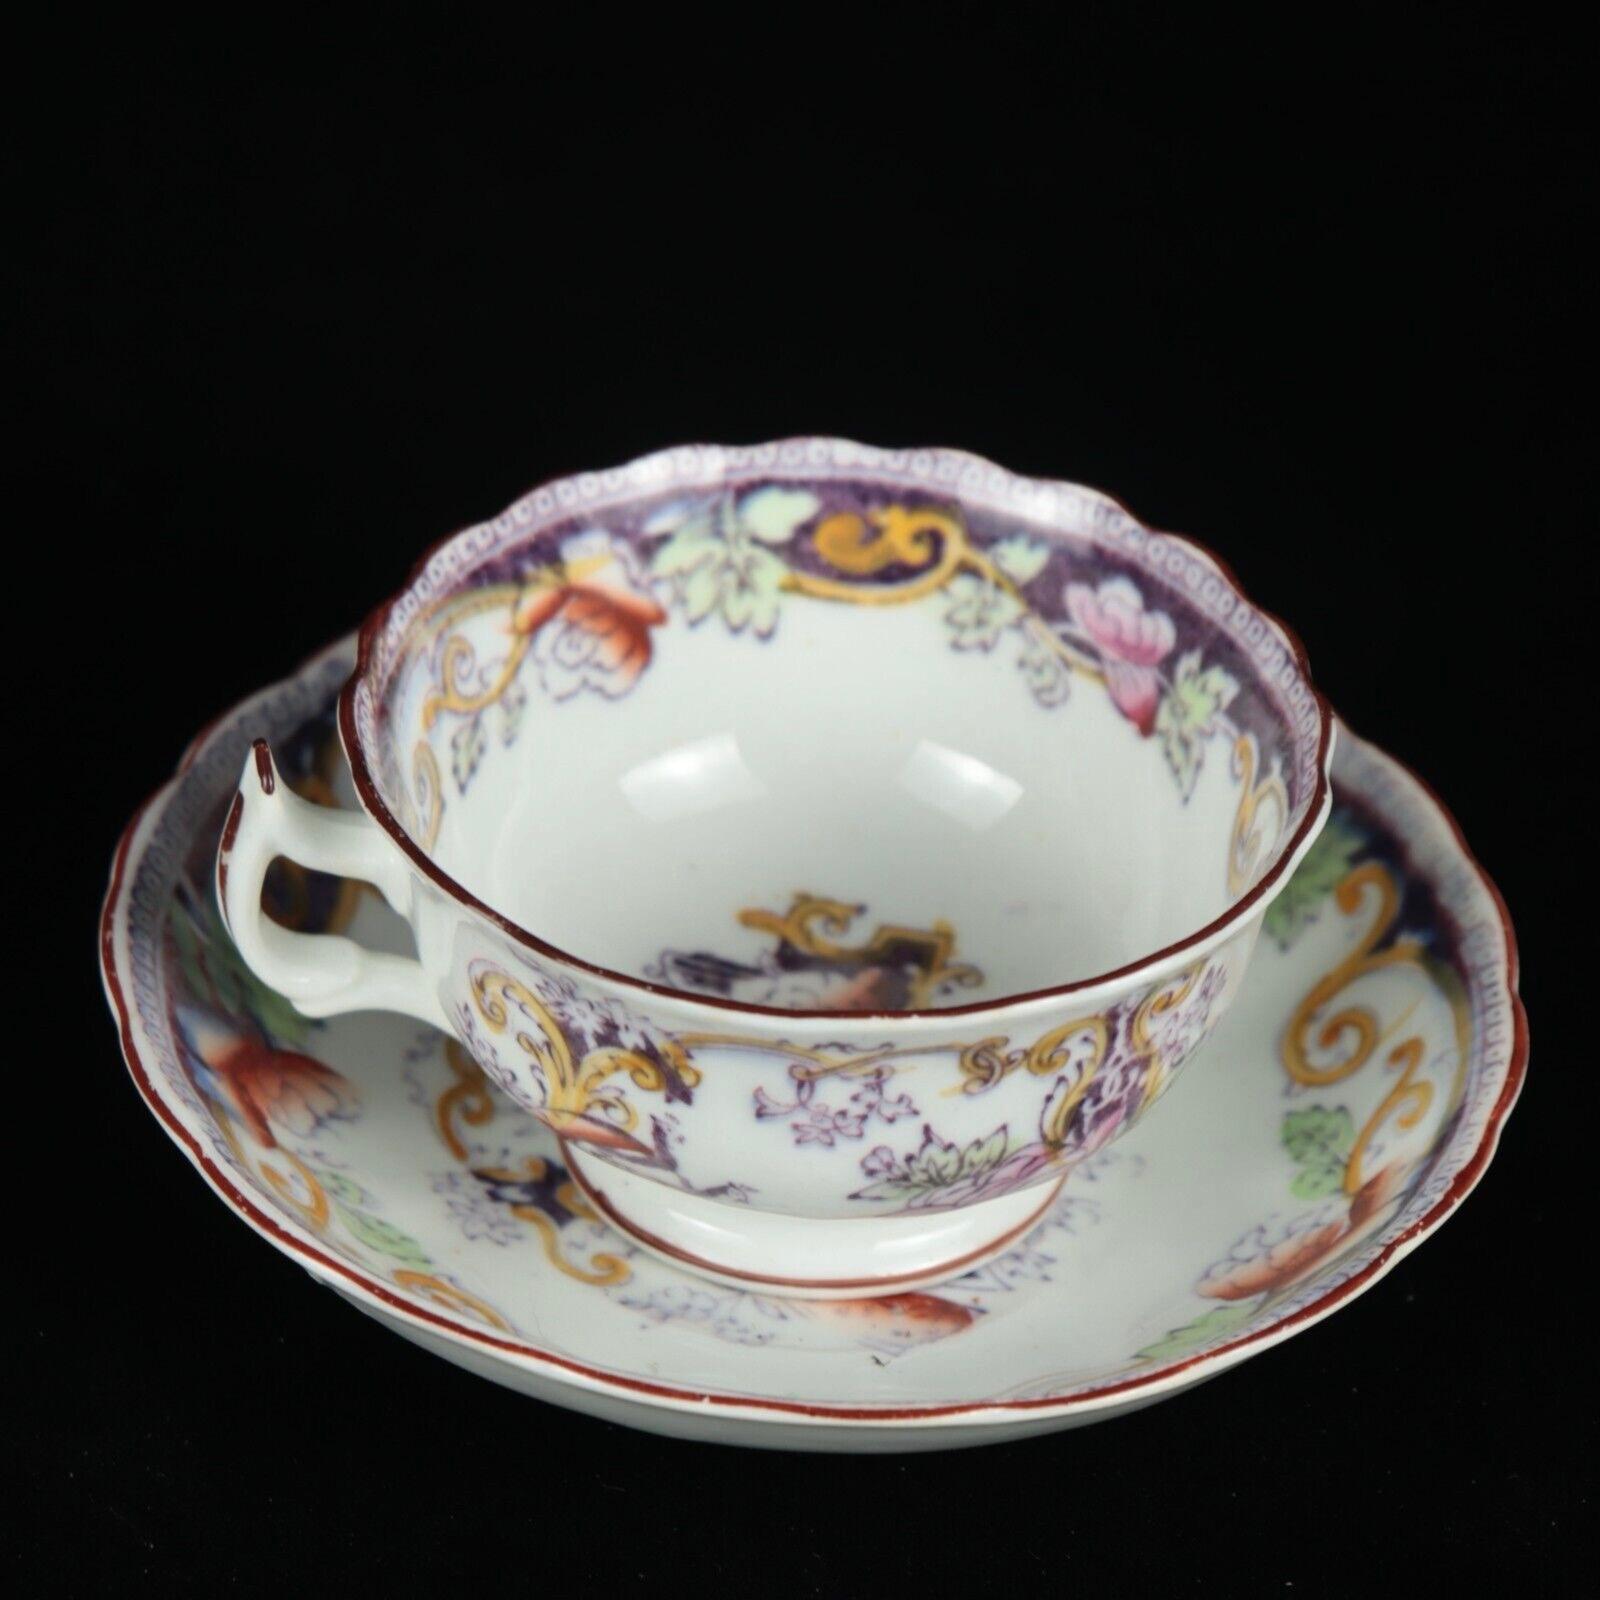 Late 19th Century Pair of Antique 1890 English Bone China Tea Cup and Saucer Sets For Sale